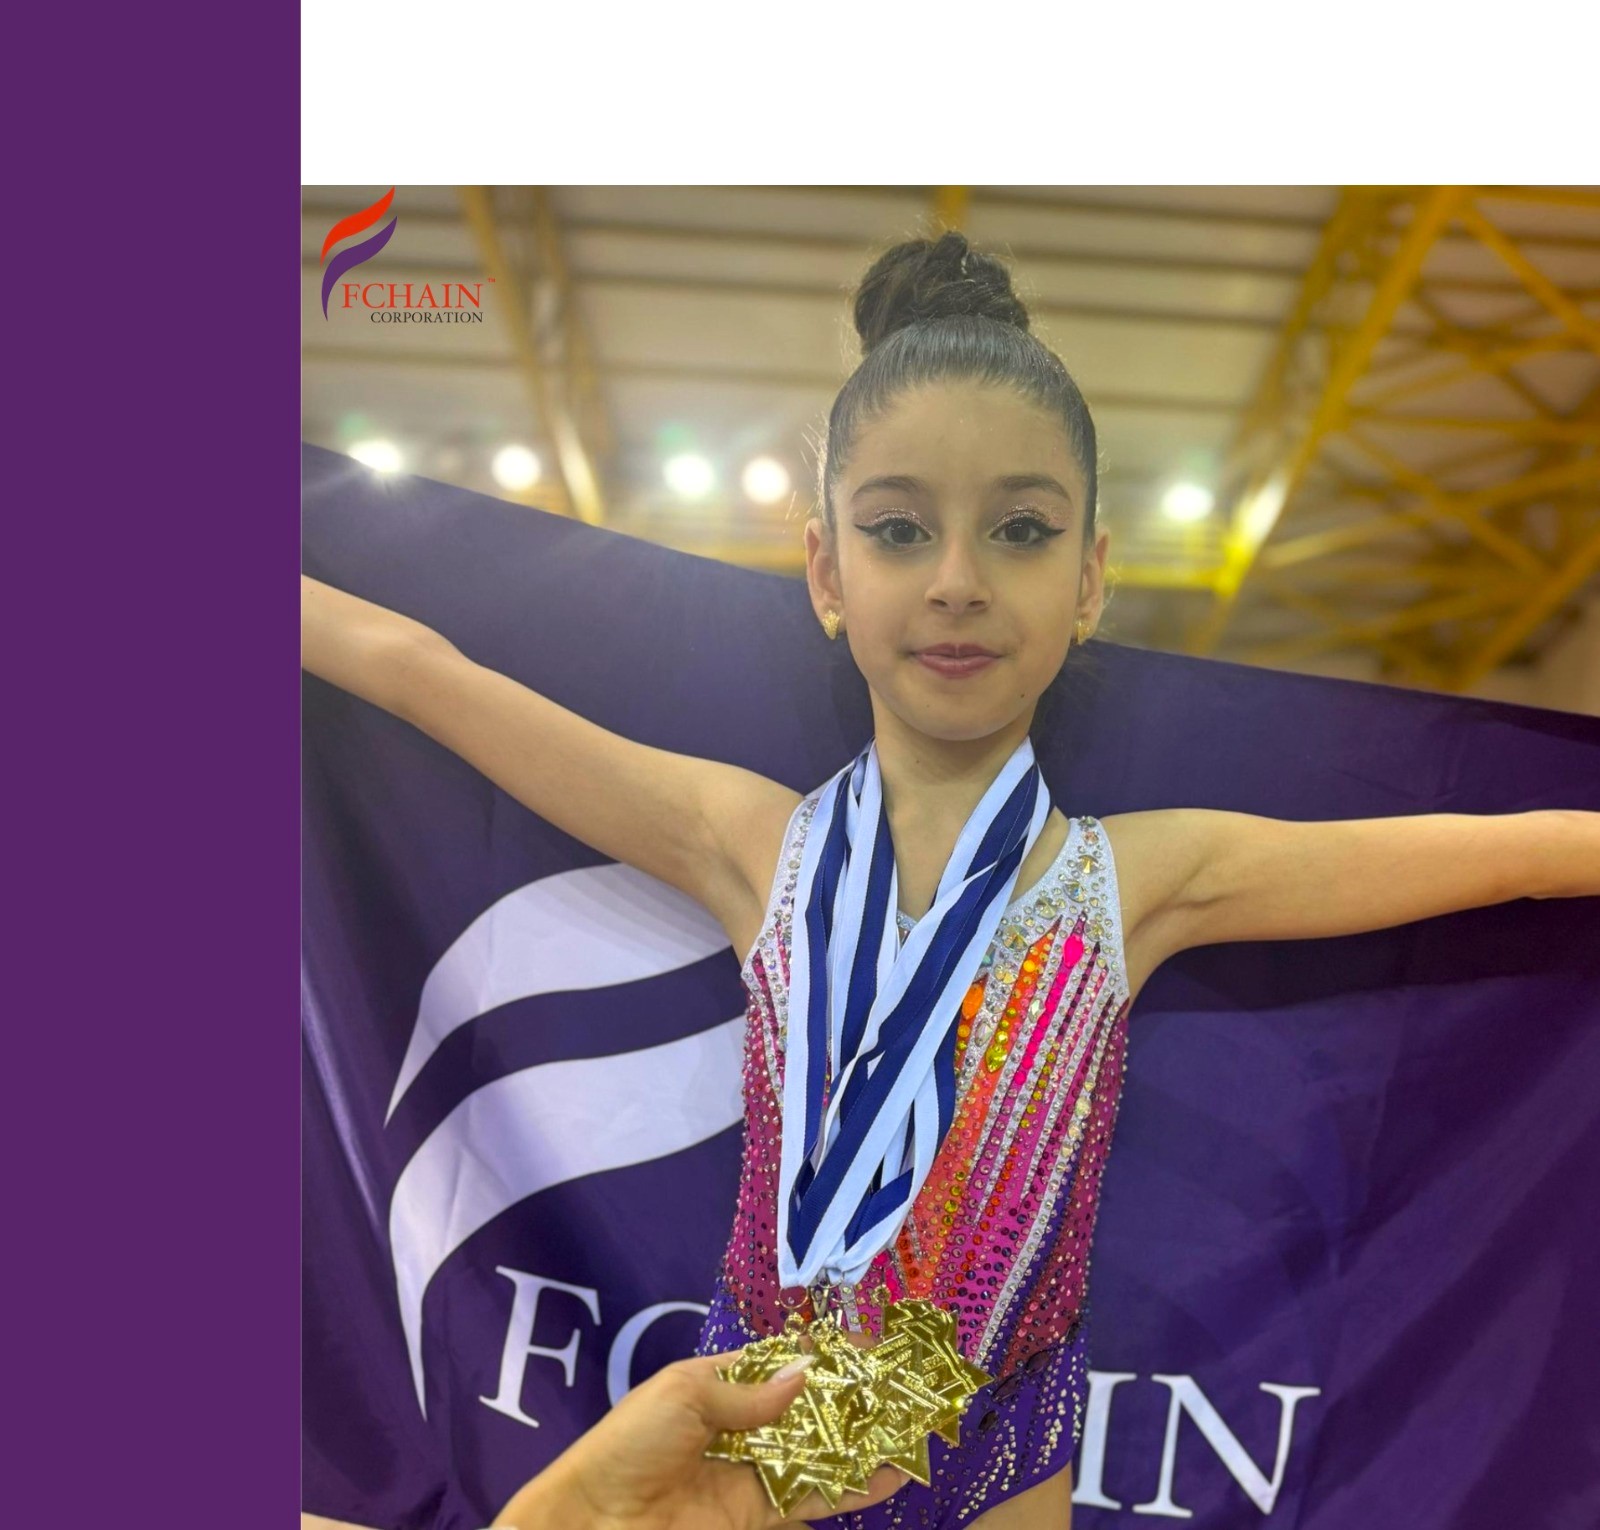 GREAT VICTORY! ZULEYKHA SHABANOVA, OFFICIALLY SPONSORED BY FCHAIN, WON 5 GOLD MEDALS IN GEORGIA!